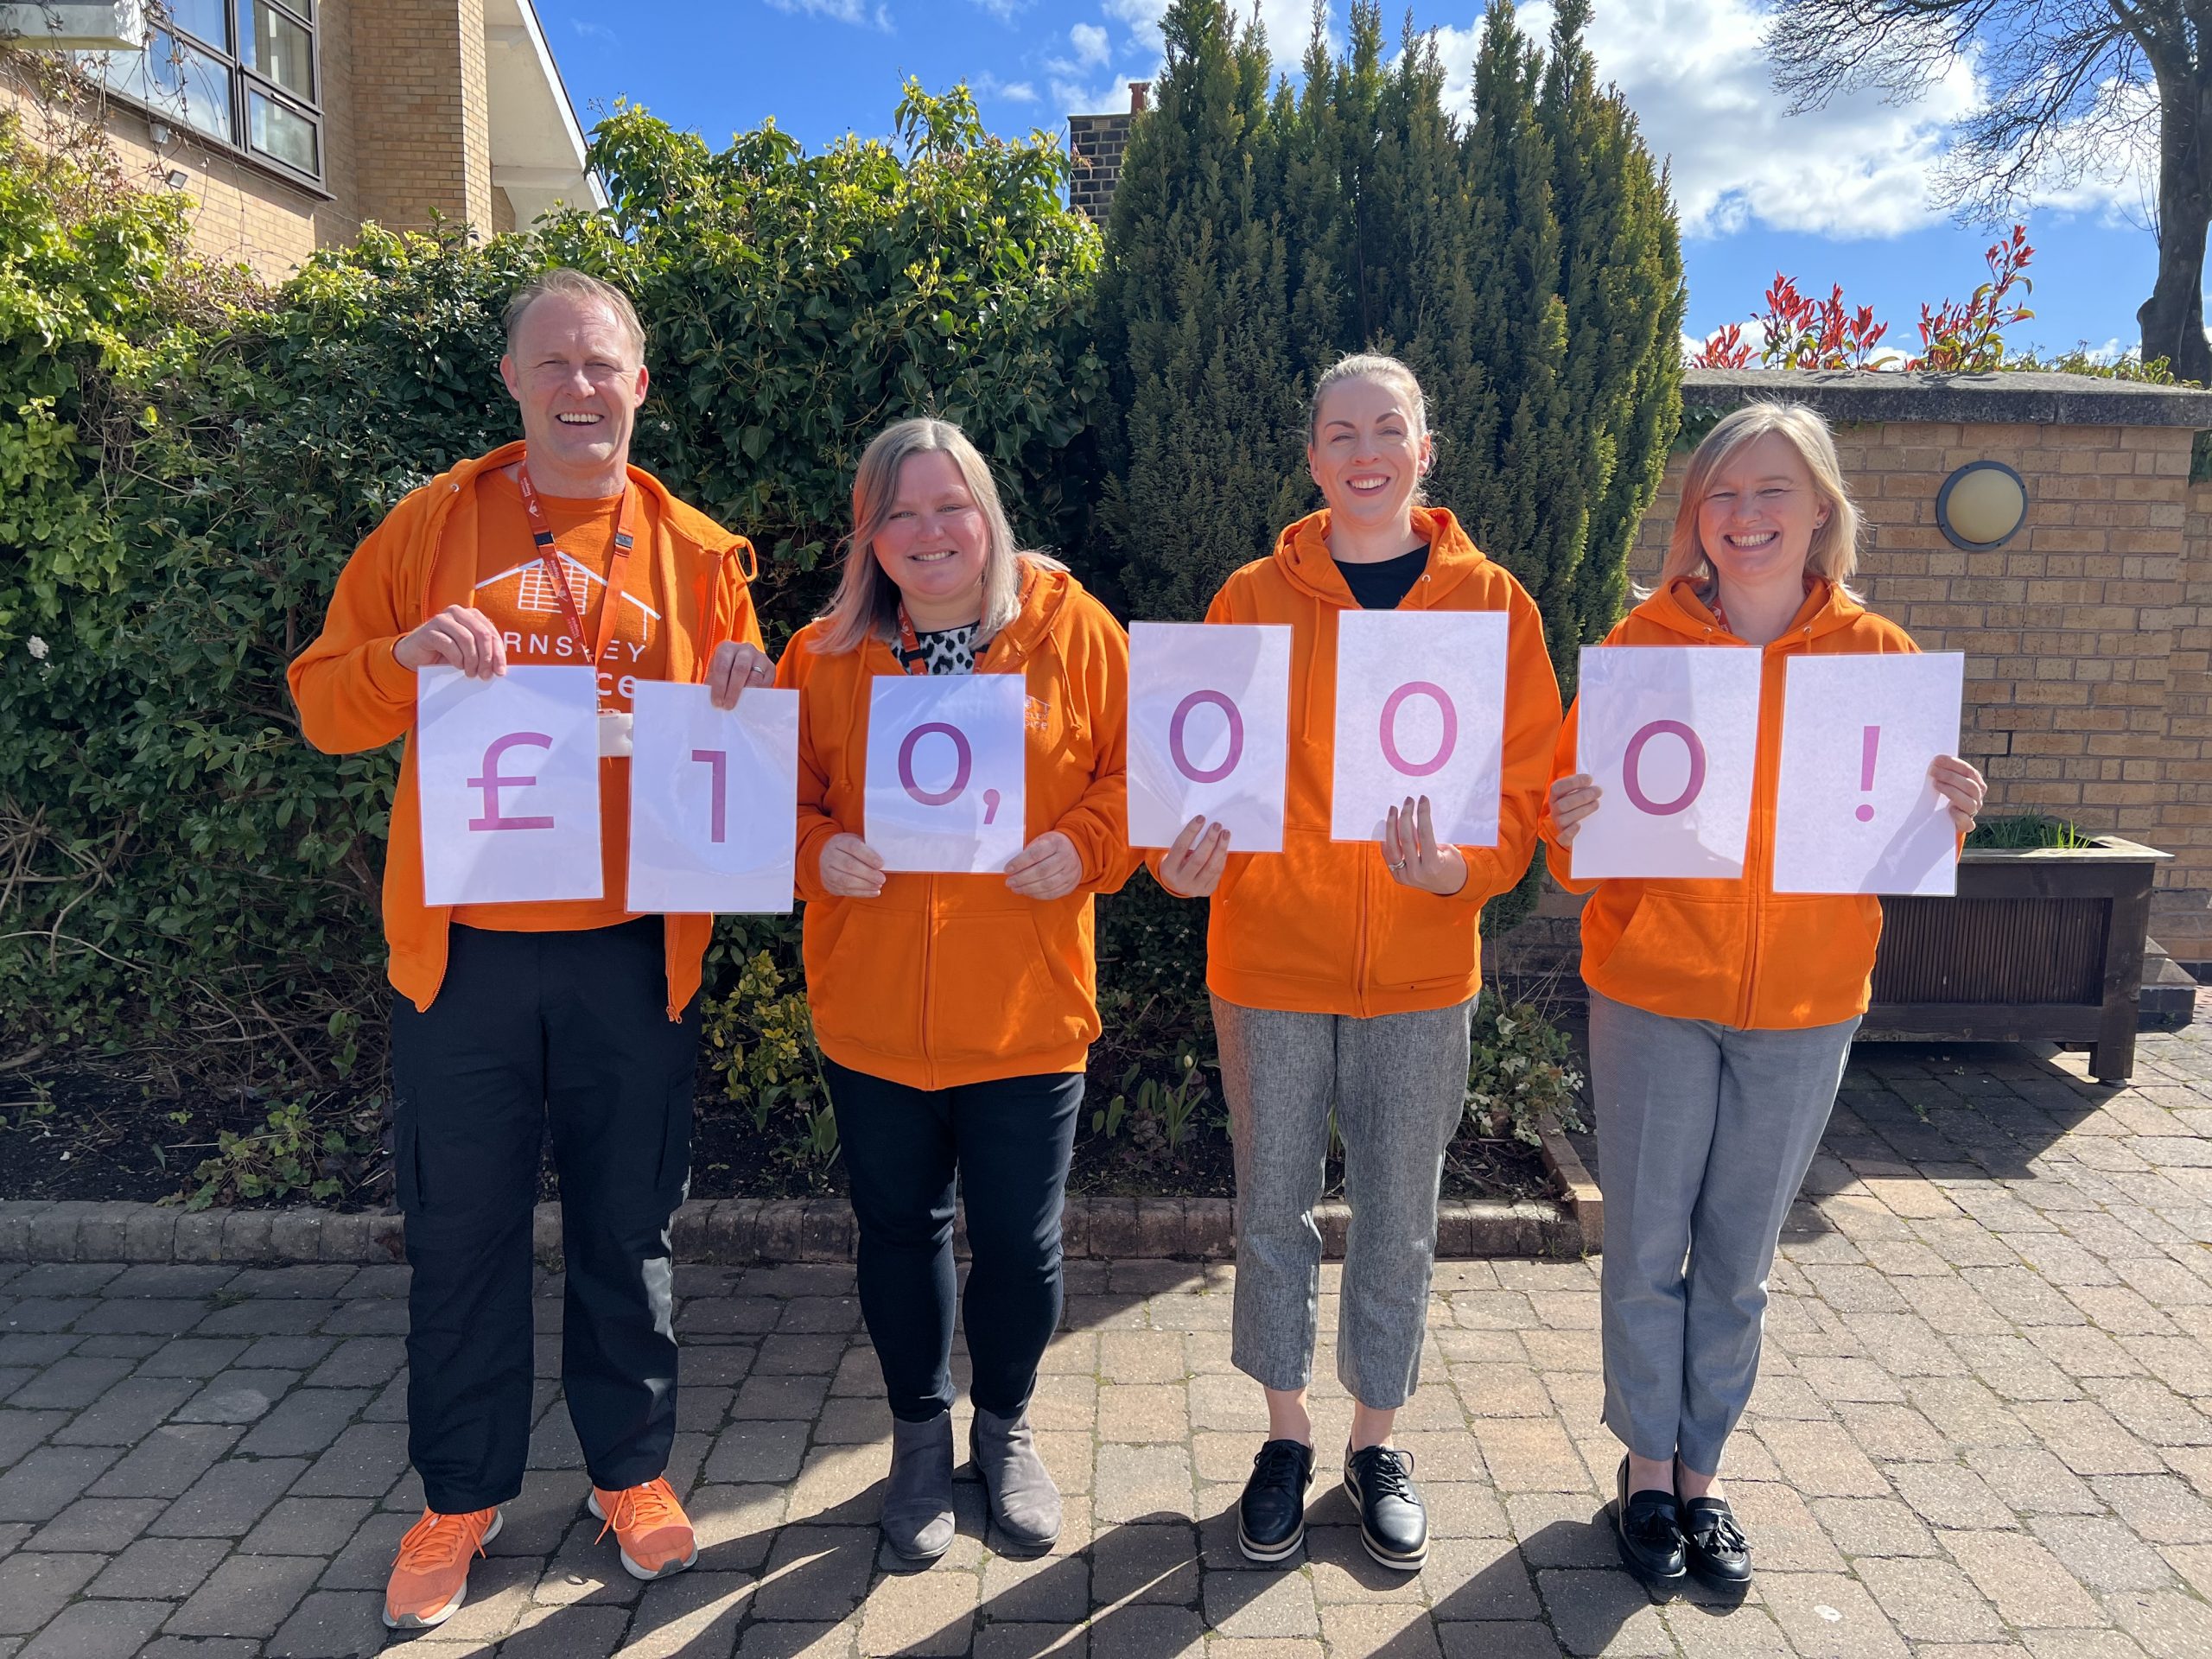 Four hospice fundraisers holding numbers that spell out £10,000. The fundraising team are wearing orange hospice jumpers and are posing outside the hospice.